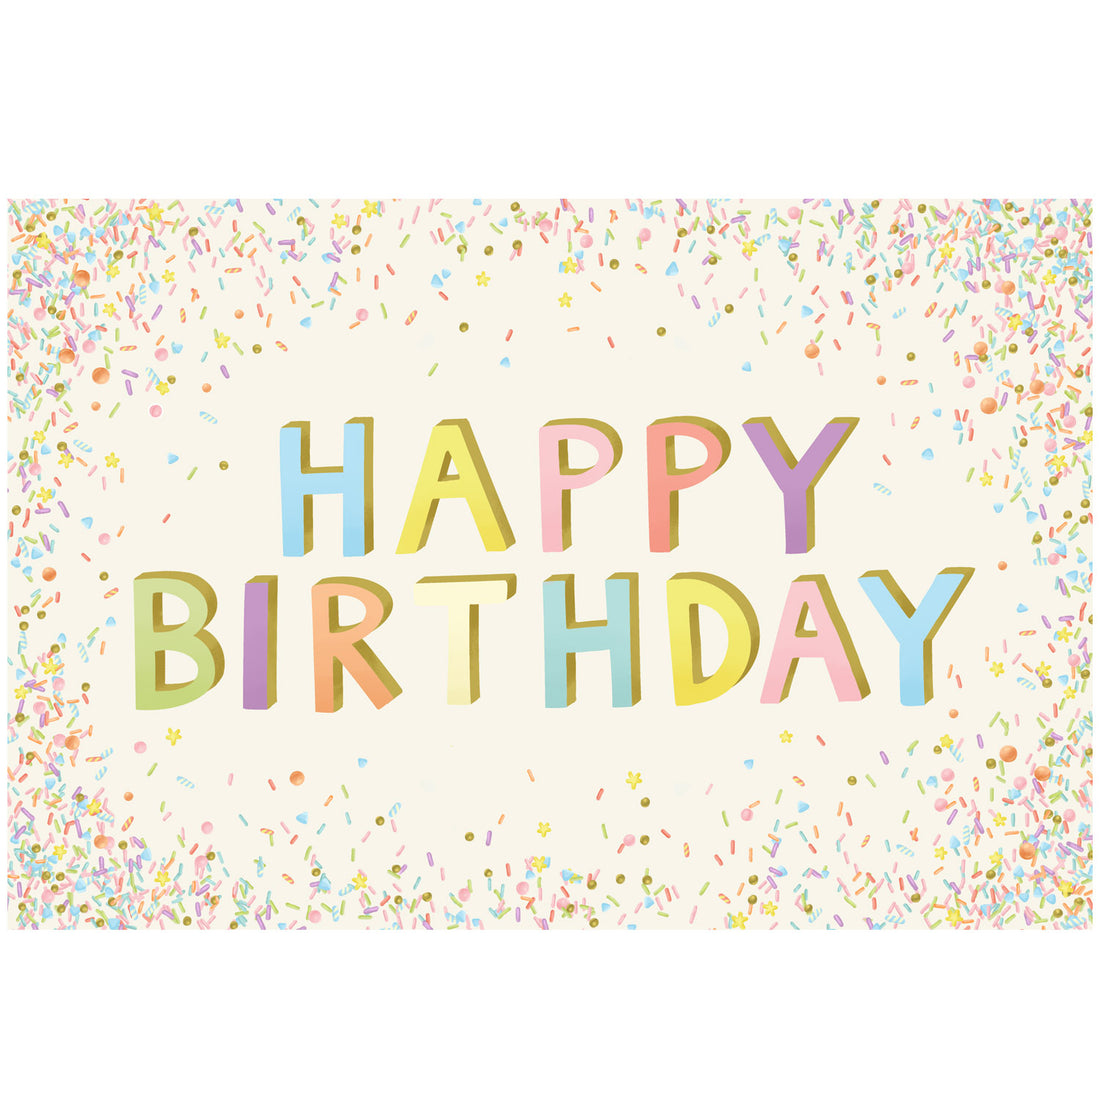 Large, sans-serif &quot;HAPPY BIRTHDAY&quot; in blue, yellow, pink, red, purple and green letters with a gold drop shadow, surrounded by a scatter of colorful confetti and sprinkles, on a cream background.